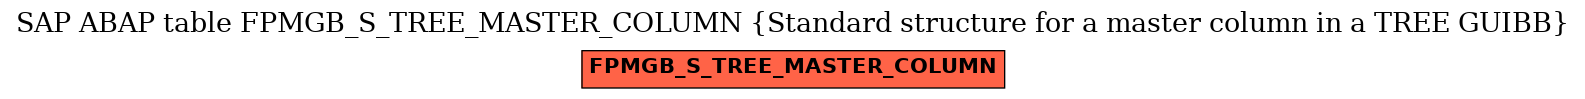 E-R Diagram for table FPMGB_S_TREE_MASTER_COLUMN (Standard structure for a master column in a TREE GUIBB)